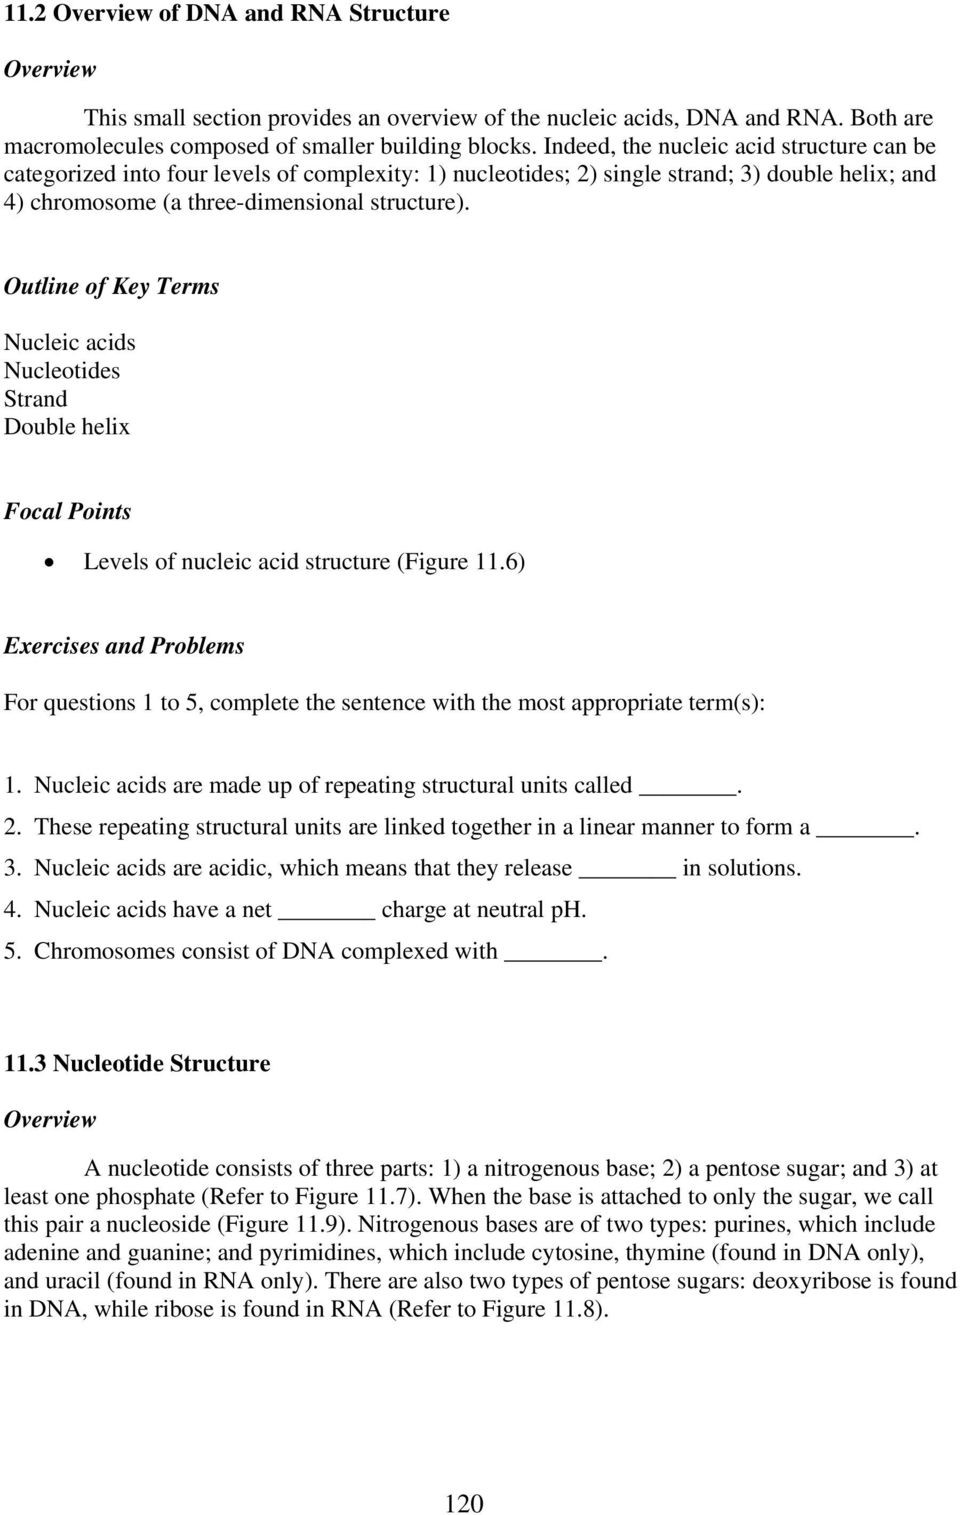 Dna and Rna Worksheet Answers Chapter 11 Molecular Structure Of Dna and Rna Pdf Free